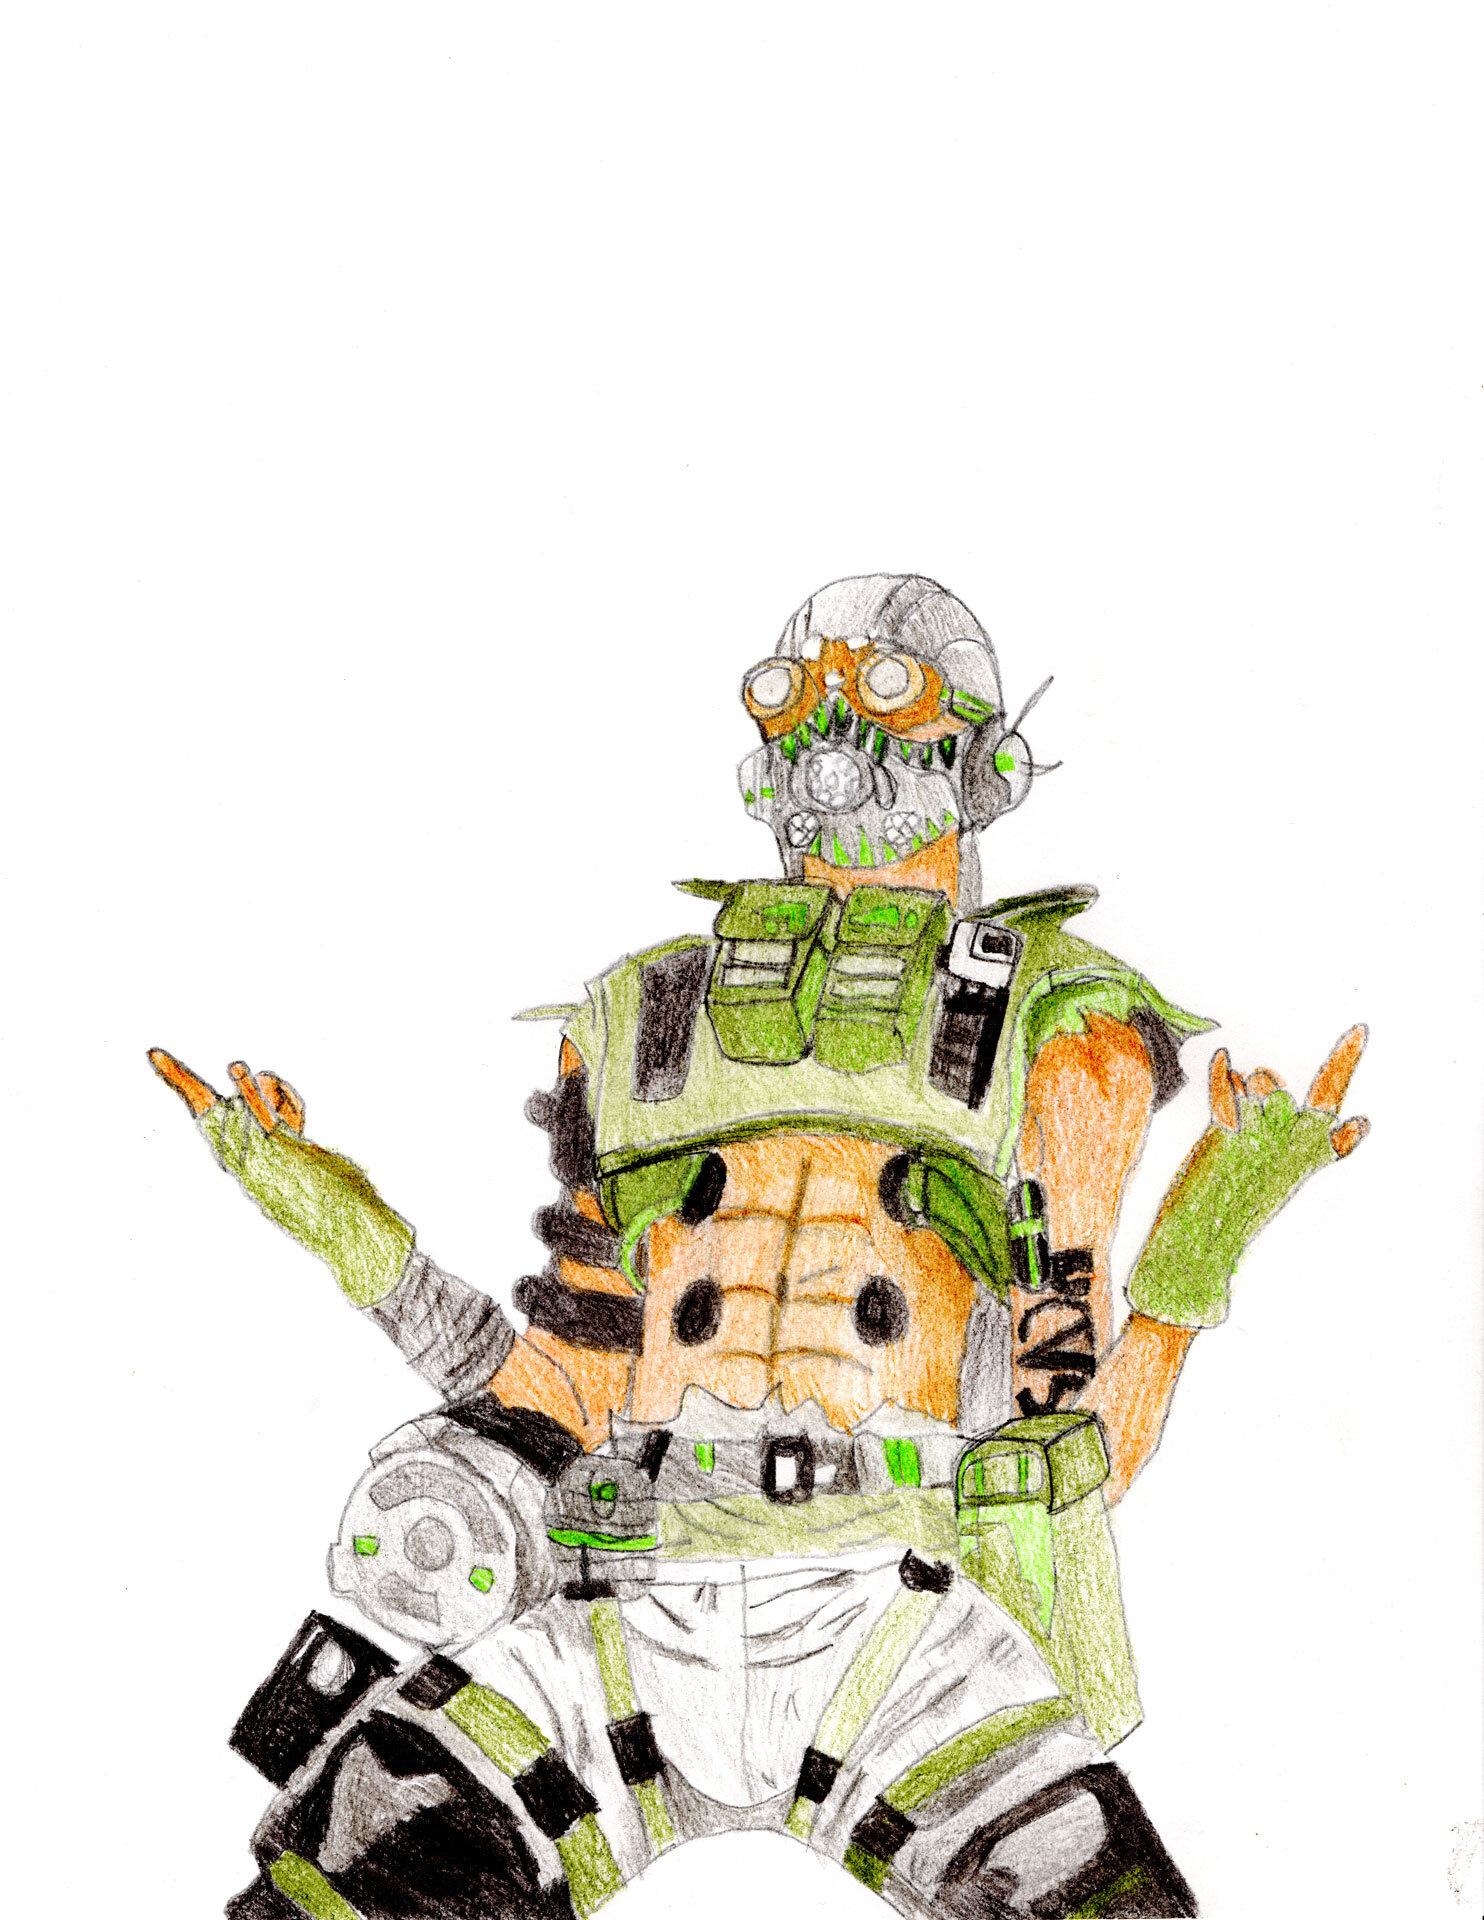 Octane from Apex Legends by Ryan Kerr age 14